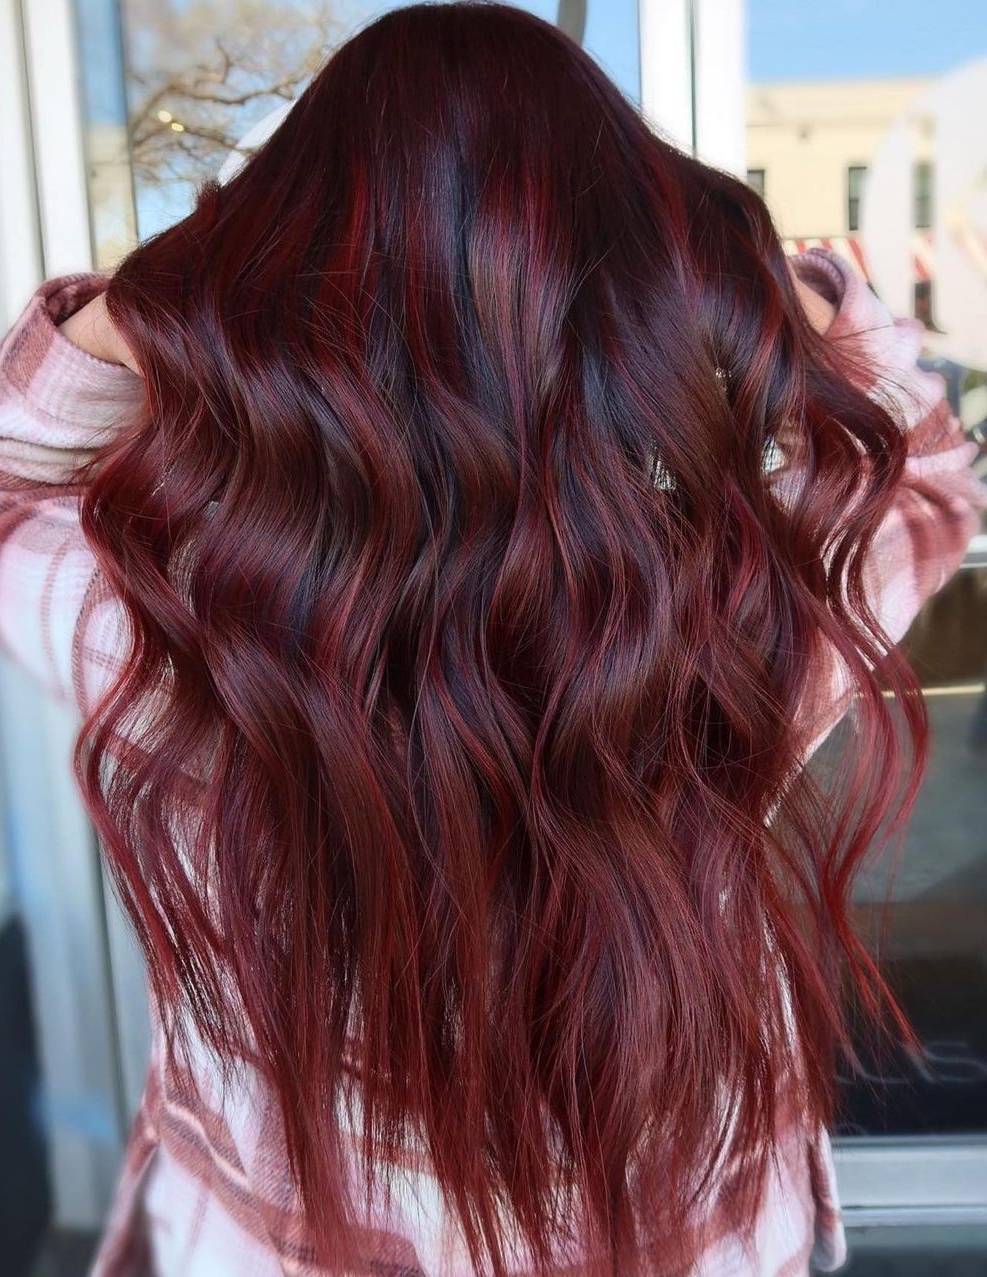 Wine Red Color on Long Wavy Hair